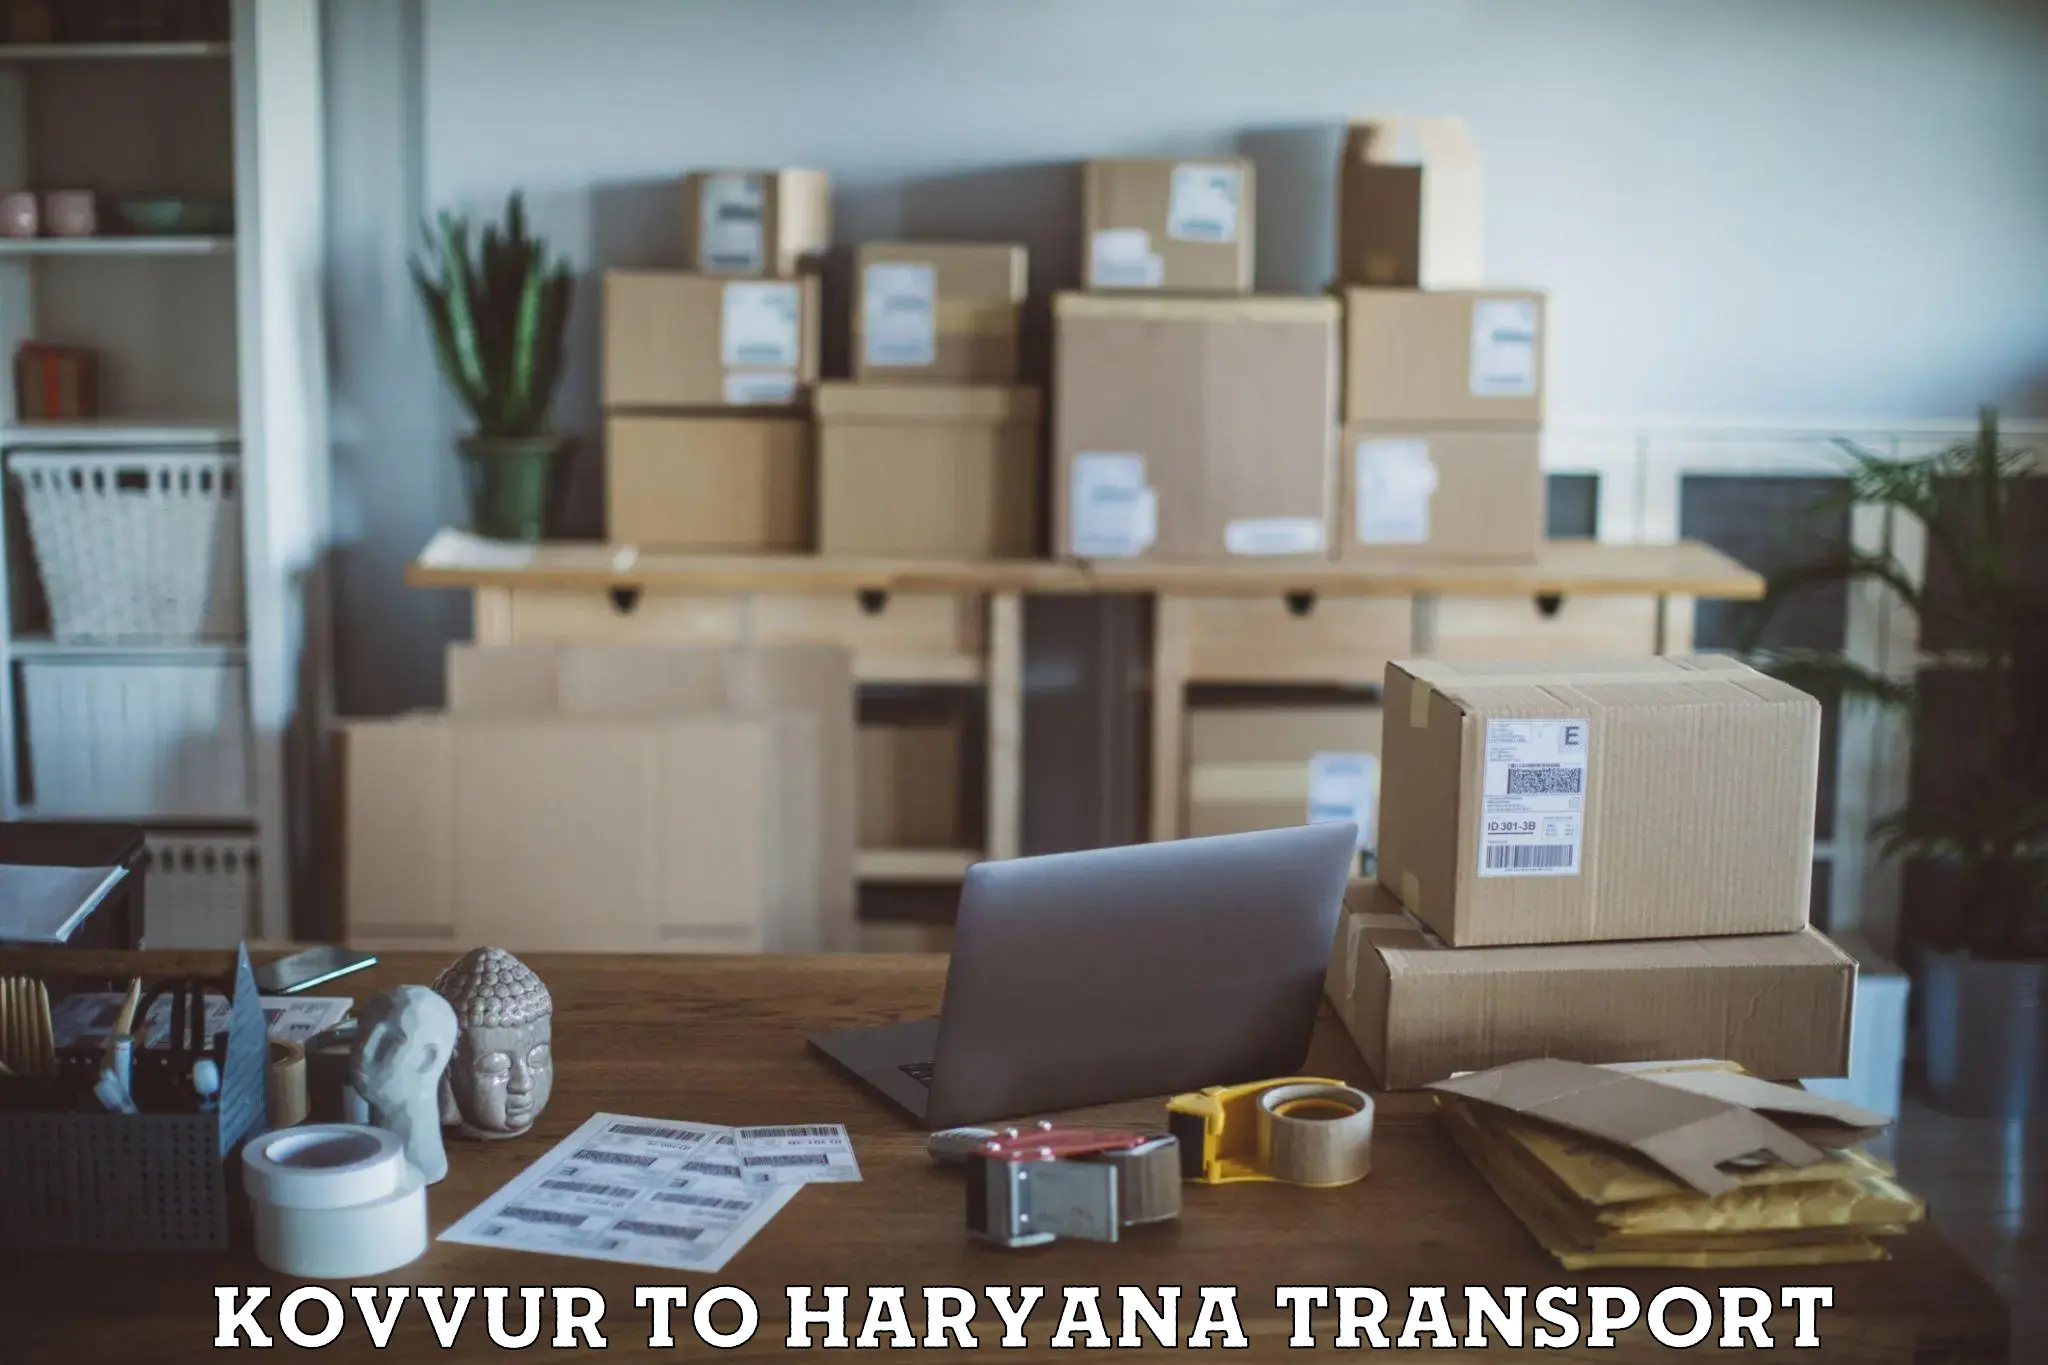 Transport shared services Kovvur to Chaudhary Charan Singh Haryana Agricultural University Hisar